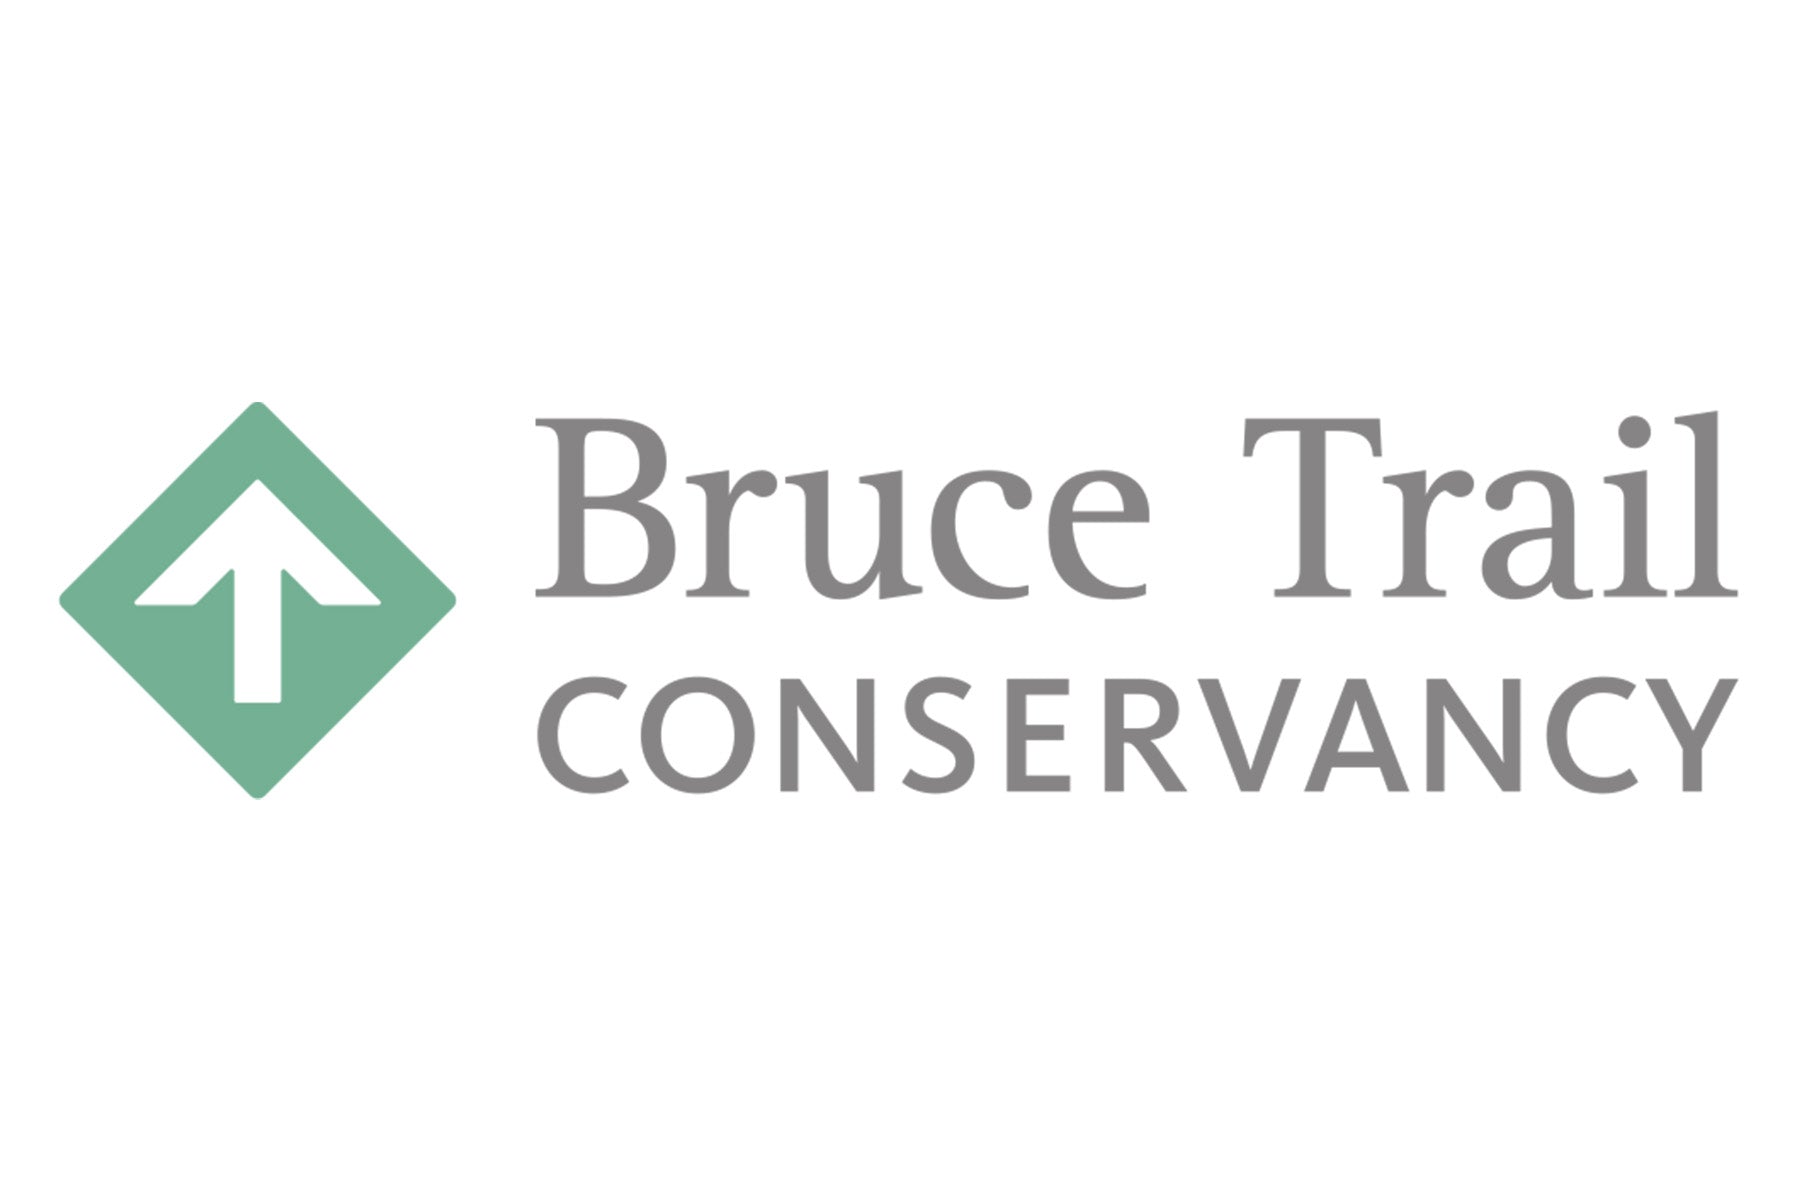 BAFFIN AND BRUCE TRAIL CONSERVANCY LAUNCH TRAIL CONSERVANCY PROJECT